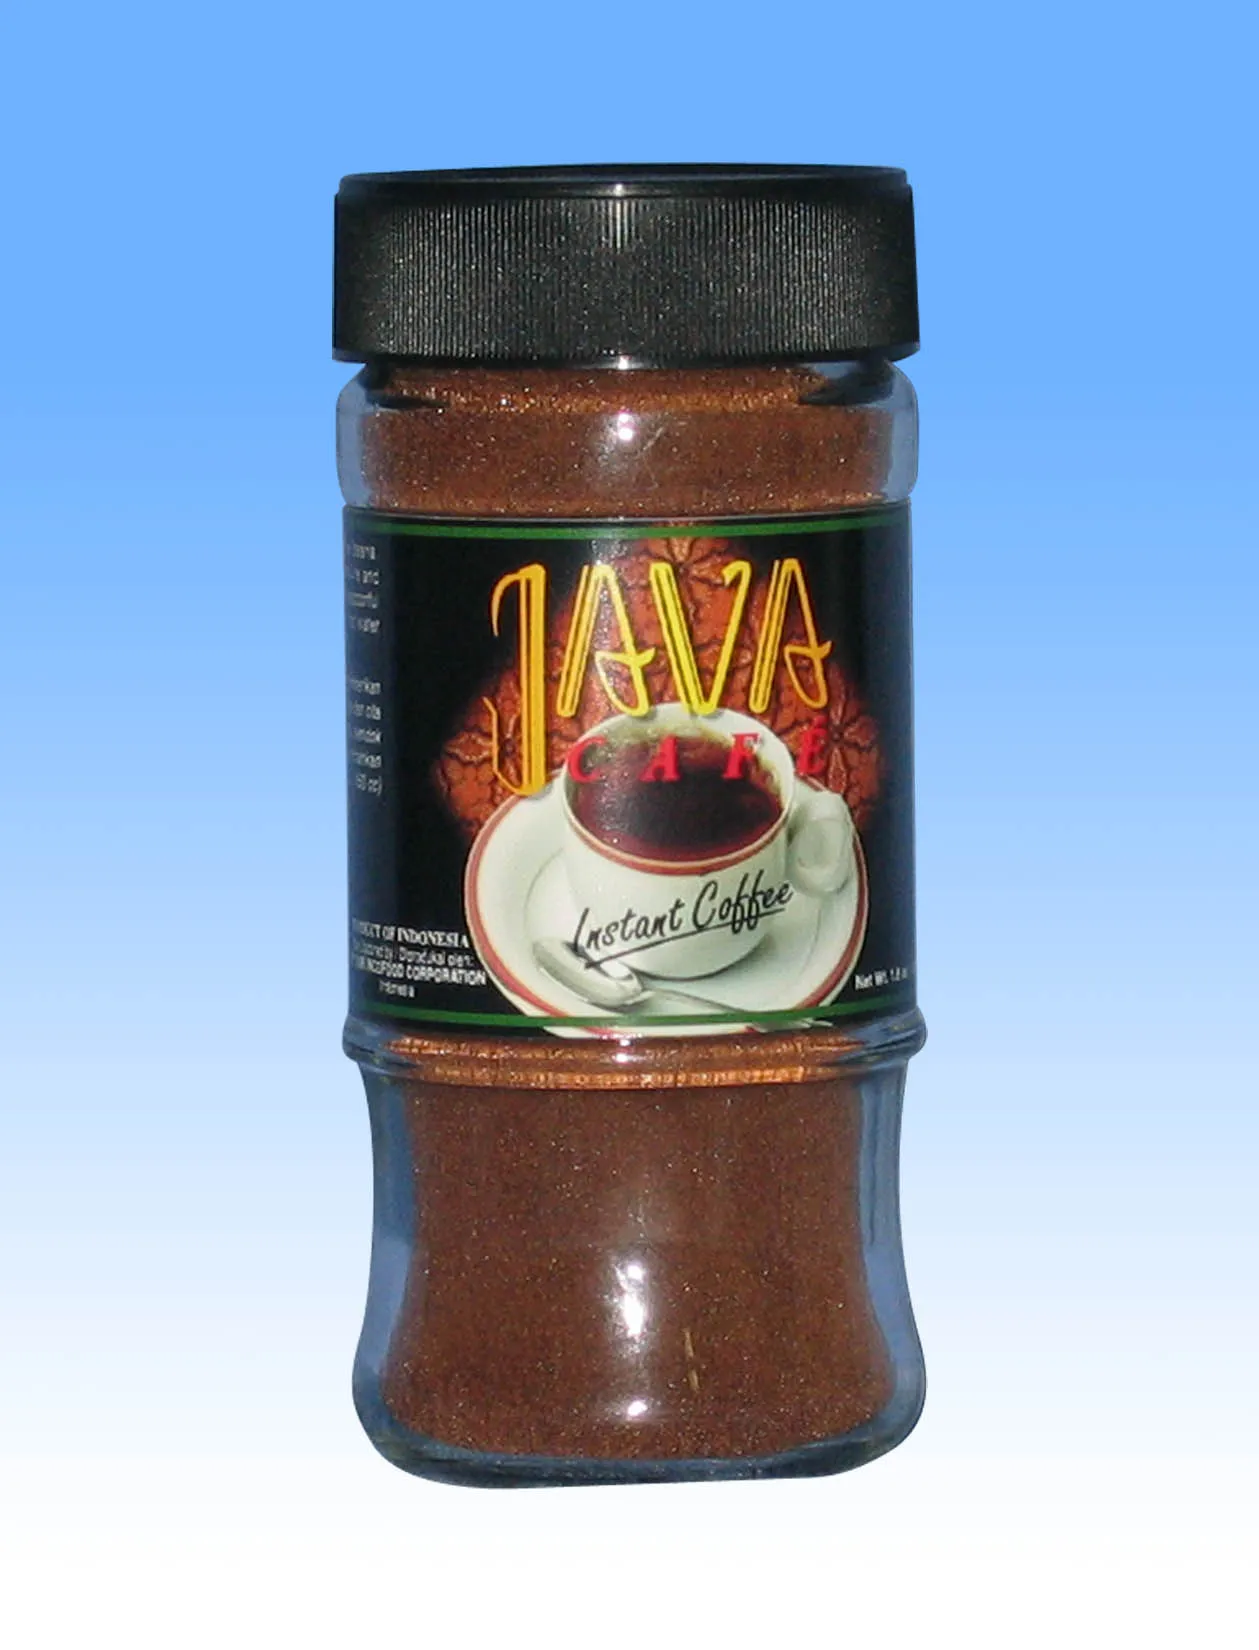 Java Cafe Instant Coffee Buy Instant Coffee Product On Alibaba Com